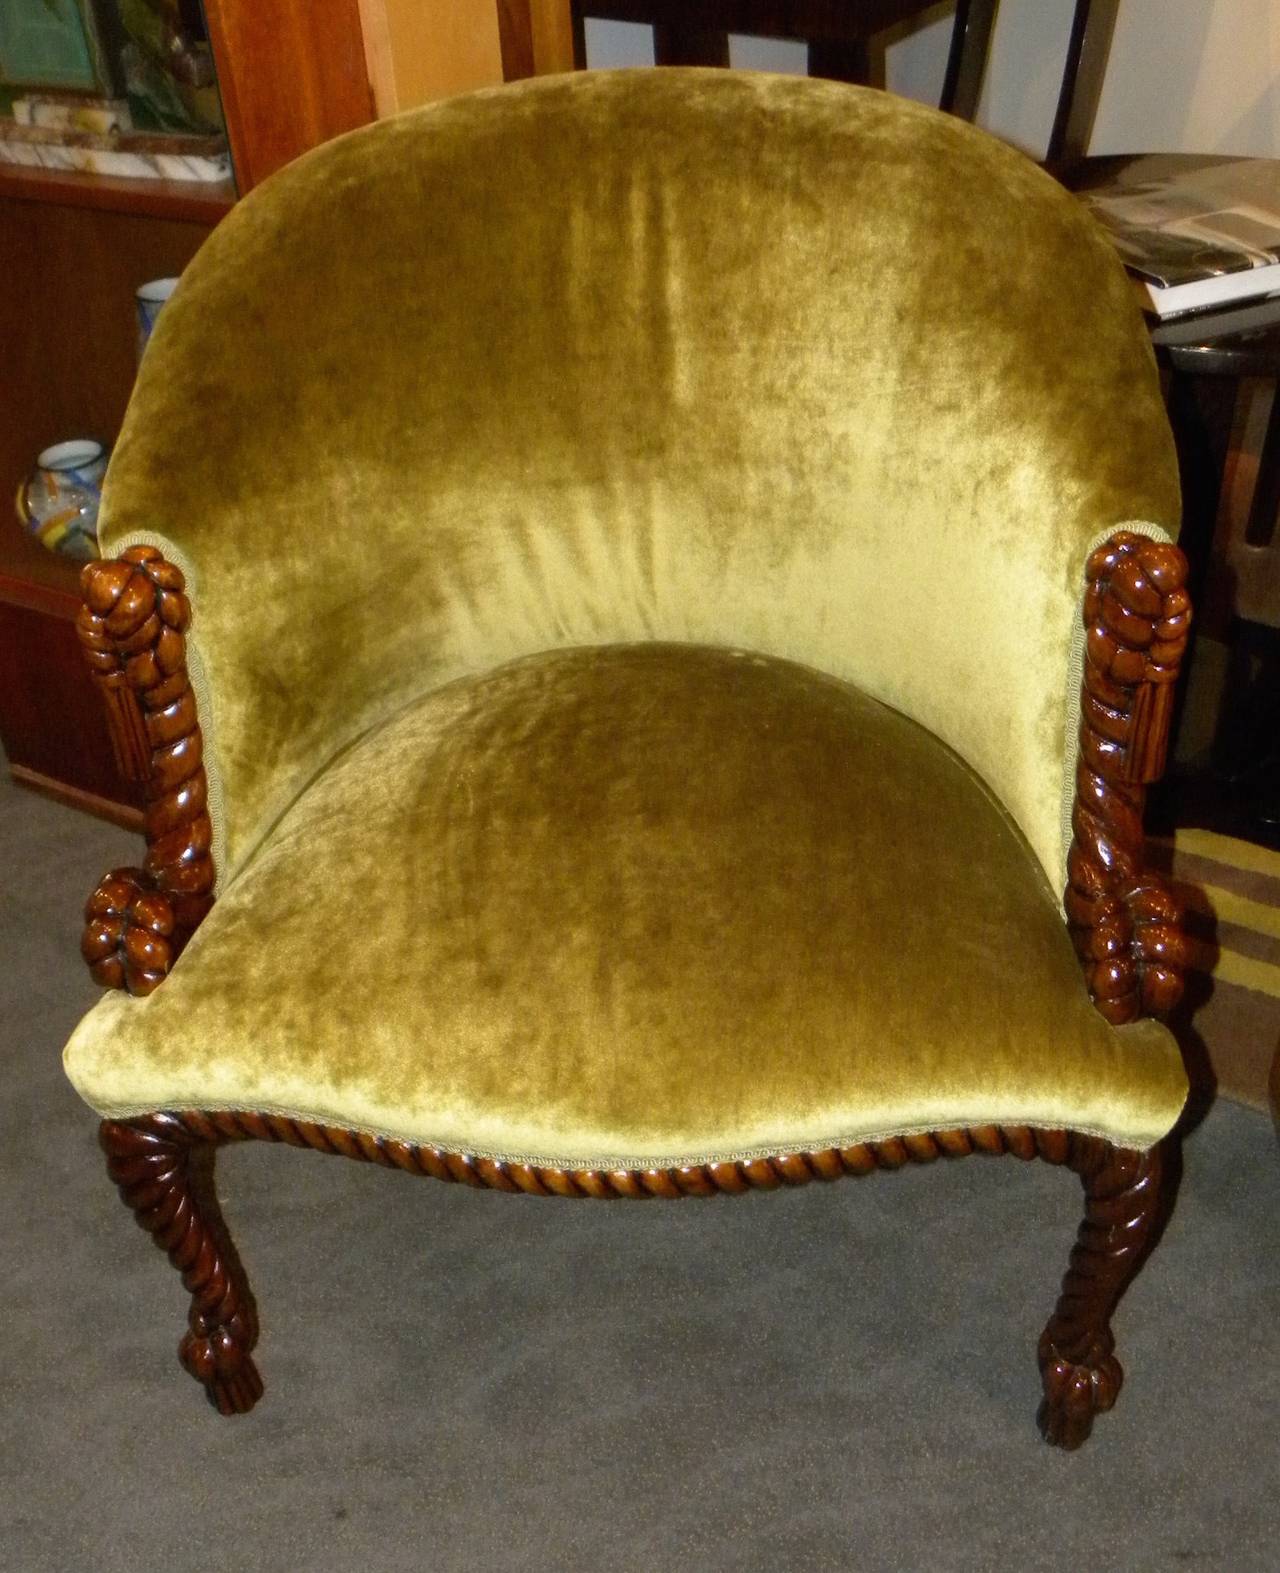 Very unusual carved solid wood Art Deco chairs. The design could be utilized with many interior points of view, these are unique Classic chairs and I've never seen anything like them. When I found these, I thought these would be great for 1st dibs.